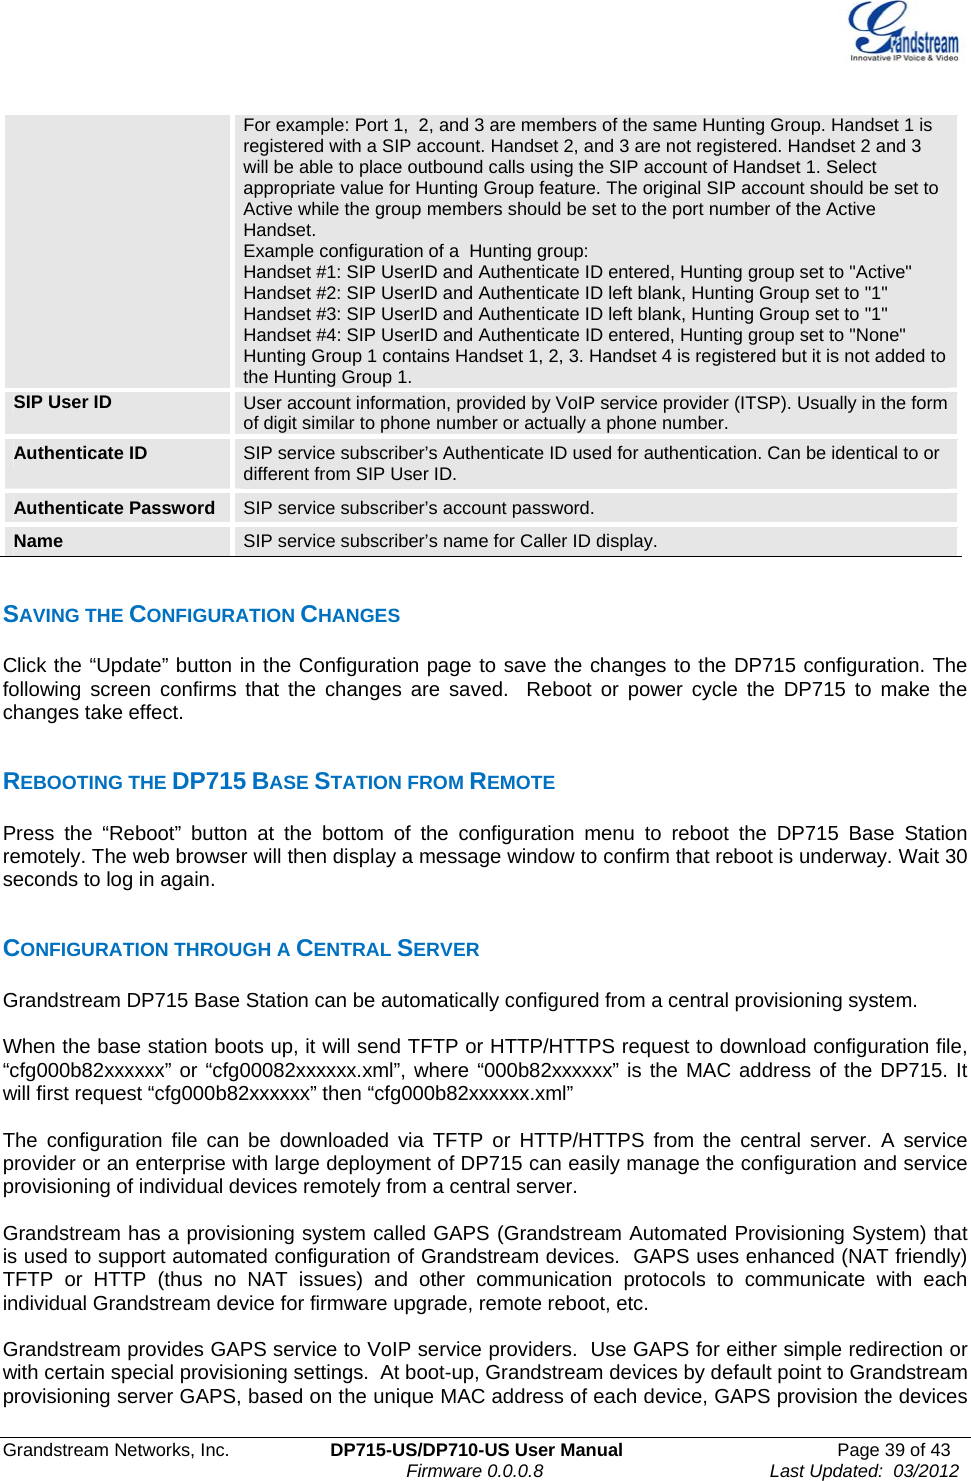  Grandstream Networks, Inc.  DP715-US/DP710-US User Manual  Page 39 of 43                                                                               Firmware 0.0.0.8                                     Last Updated:  03/2012 For example: Port 1,  2, and 3 are members of the same Hunting Group. Handset 1 is registered with a SIP account. Handset 2, and 3 are not registered. Handset 2 and 3 will be able to place outbound calls using the SIP account of Handset 1. Select appropriate value for Hunting Group feature. The original SIP account should be set to Active while the group members should be set to the port number of the Active Handset. Example configuration of a  Hunting group: Handset #1: SIP UserID and Authenticate ID entered, Hunting group set to &quot;Active&quot; Handset #2: SIP UserID and Authenticate ID left blank, Hunting Group set to &quot;1&quot; Handset #3: SIP UserID and Authenticate ID left blank, Hunting Group set to &quot;1&quot; Handset #4: SIP UserID and Authenticate ID entered, Hunting group set to &quot;None&quot; Hunting Group 1 contains Handset 1, 2, 3. Handset 4 is registered but it is not added to the Hunting Group 1. SIP User ID  User account information, provided by VoIP service provider (ITSP). Usually in the form of digit similar to phone number or actually a phone number. Authenticate ID  SIP service subscriber’s Authenticate ID used for authentication. Can be identical to or different from SIP User ID. Authenticate Password  SIP service subscriber’s account password. Name   SIP service subscriber’s name for Caller ID display.   SAVING THE CONFIGURATION CHANGES Click the “Update” button in the Configuration page to save the changes to the DP715 configuration. The following screen confirms that the changes are saved.  Reboot or power cycle the DP715 to make the changes take effect.  REBOOTING THE DP715 BASE STATION FROM REMOTE Press the “Reboot” button at the bottom of the configuration menu to reboot the DP715 Base Station remotely. The web browser will then display a message window to confirm that reboot is underway. Wait 30 seconds to log in again.  CONFIGURATION THROUGH A CENTRAL SERVER Grandstream DP715 Base Station can be automatically configured from a central provisioning system.  When the base station boots up, it will send TFTP or HTTP/HTTPS request to download configuration file,  “cfg000b82xxxxxx” or “cfg00082xxxxxx.xml”, where “000b82xxxxxx” is the MAC address of the DP715. It will first request “cfg000b82xxxxxx” then “cfg000b82xxxxxx.xml”  The configuration file can be downloaded via TFTP or HTTP/HTTPS from the central server. A service provider or an enterprise with large deployment of DP715 can easily manage the configuration and service provisioning of individual devices remotely from a central server.   Grandstream has a provisioning system called GAPS (Grandstream Automated Provisioning System) that is used to support automated configuration of Grandstream devices.  GAPS uses enhanced (NAT friendly) TFTP or HTTP (thus no NAT issues) and other communication protocols to communicate with each individual Grandstream device for firmware upgrade, remote reboot, etc.   Grandstream provides GAPS service to VoIP service providers.  Use GAPS for either simple redirection or with certain special provisioning settings.  At boot-up, Grandstream devices by default point to Grandstream provisioning server GAPS, based on the unique MAC address of each device, GAPS provision the devices 